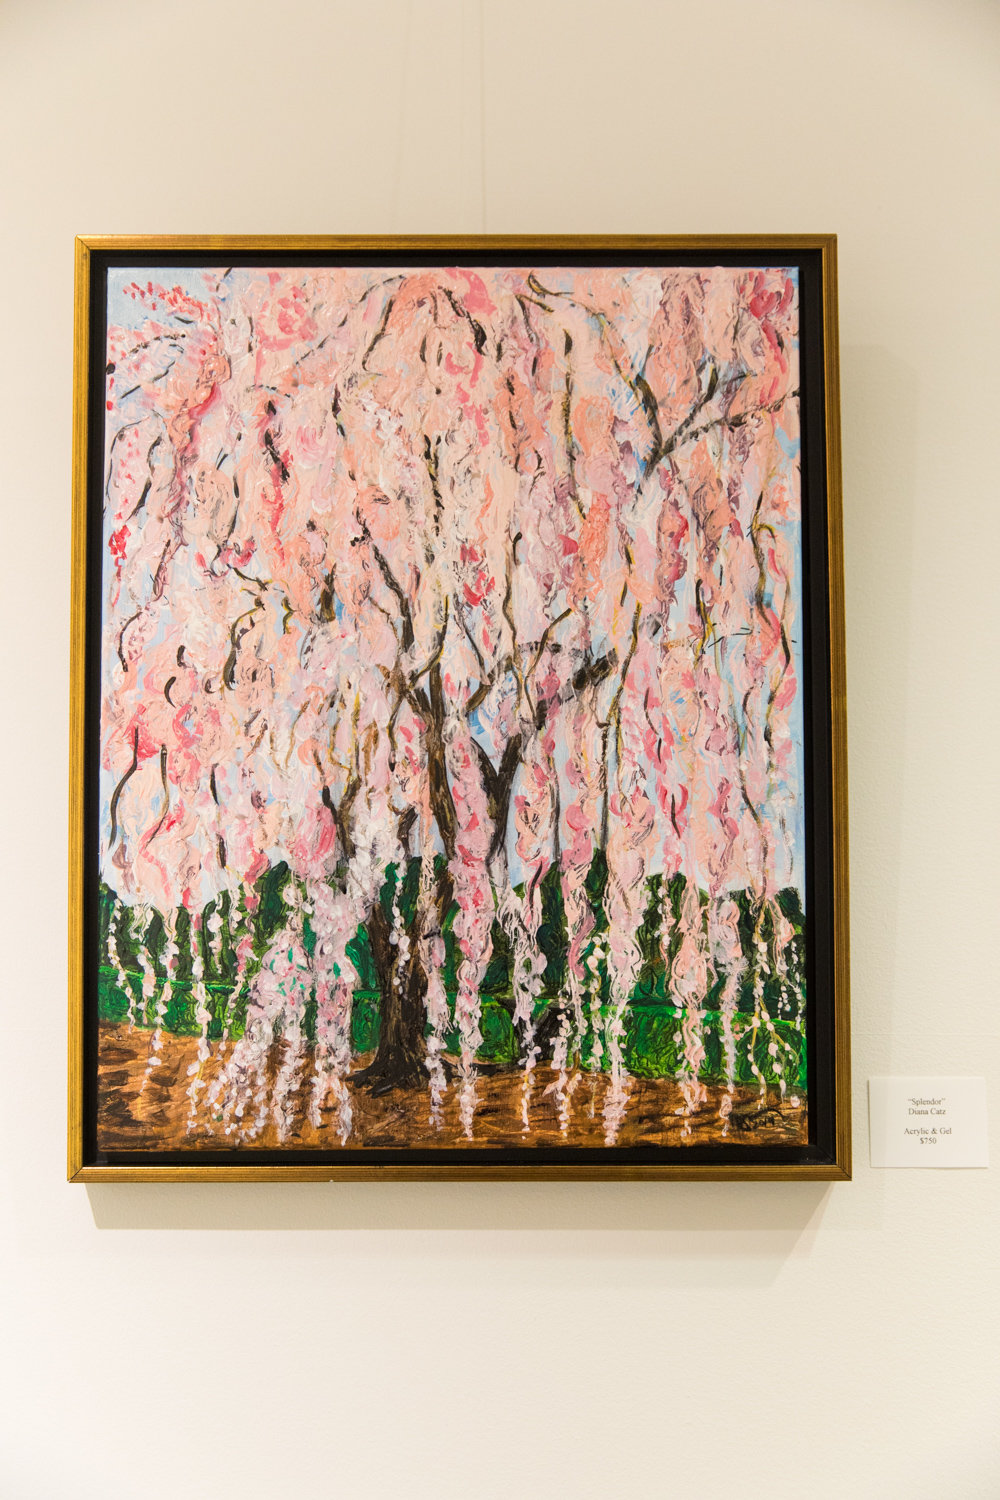 Diana Catz’s painting ‘Splendor’ is included in the exhibition ‘Tree Time,’ on display at The Riverdale Y on Arlington Avenue through Nov. 3.